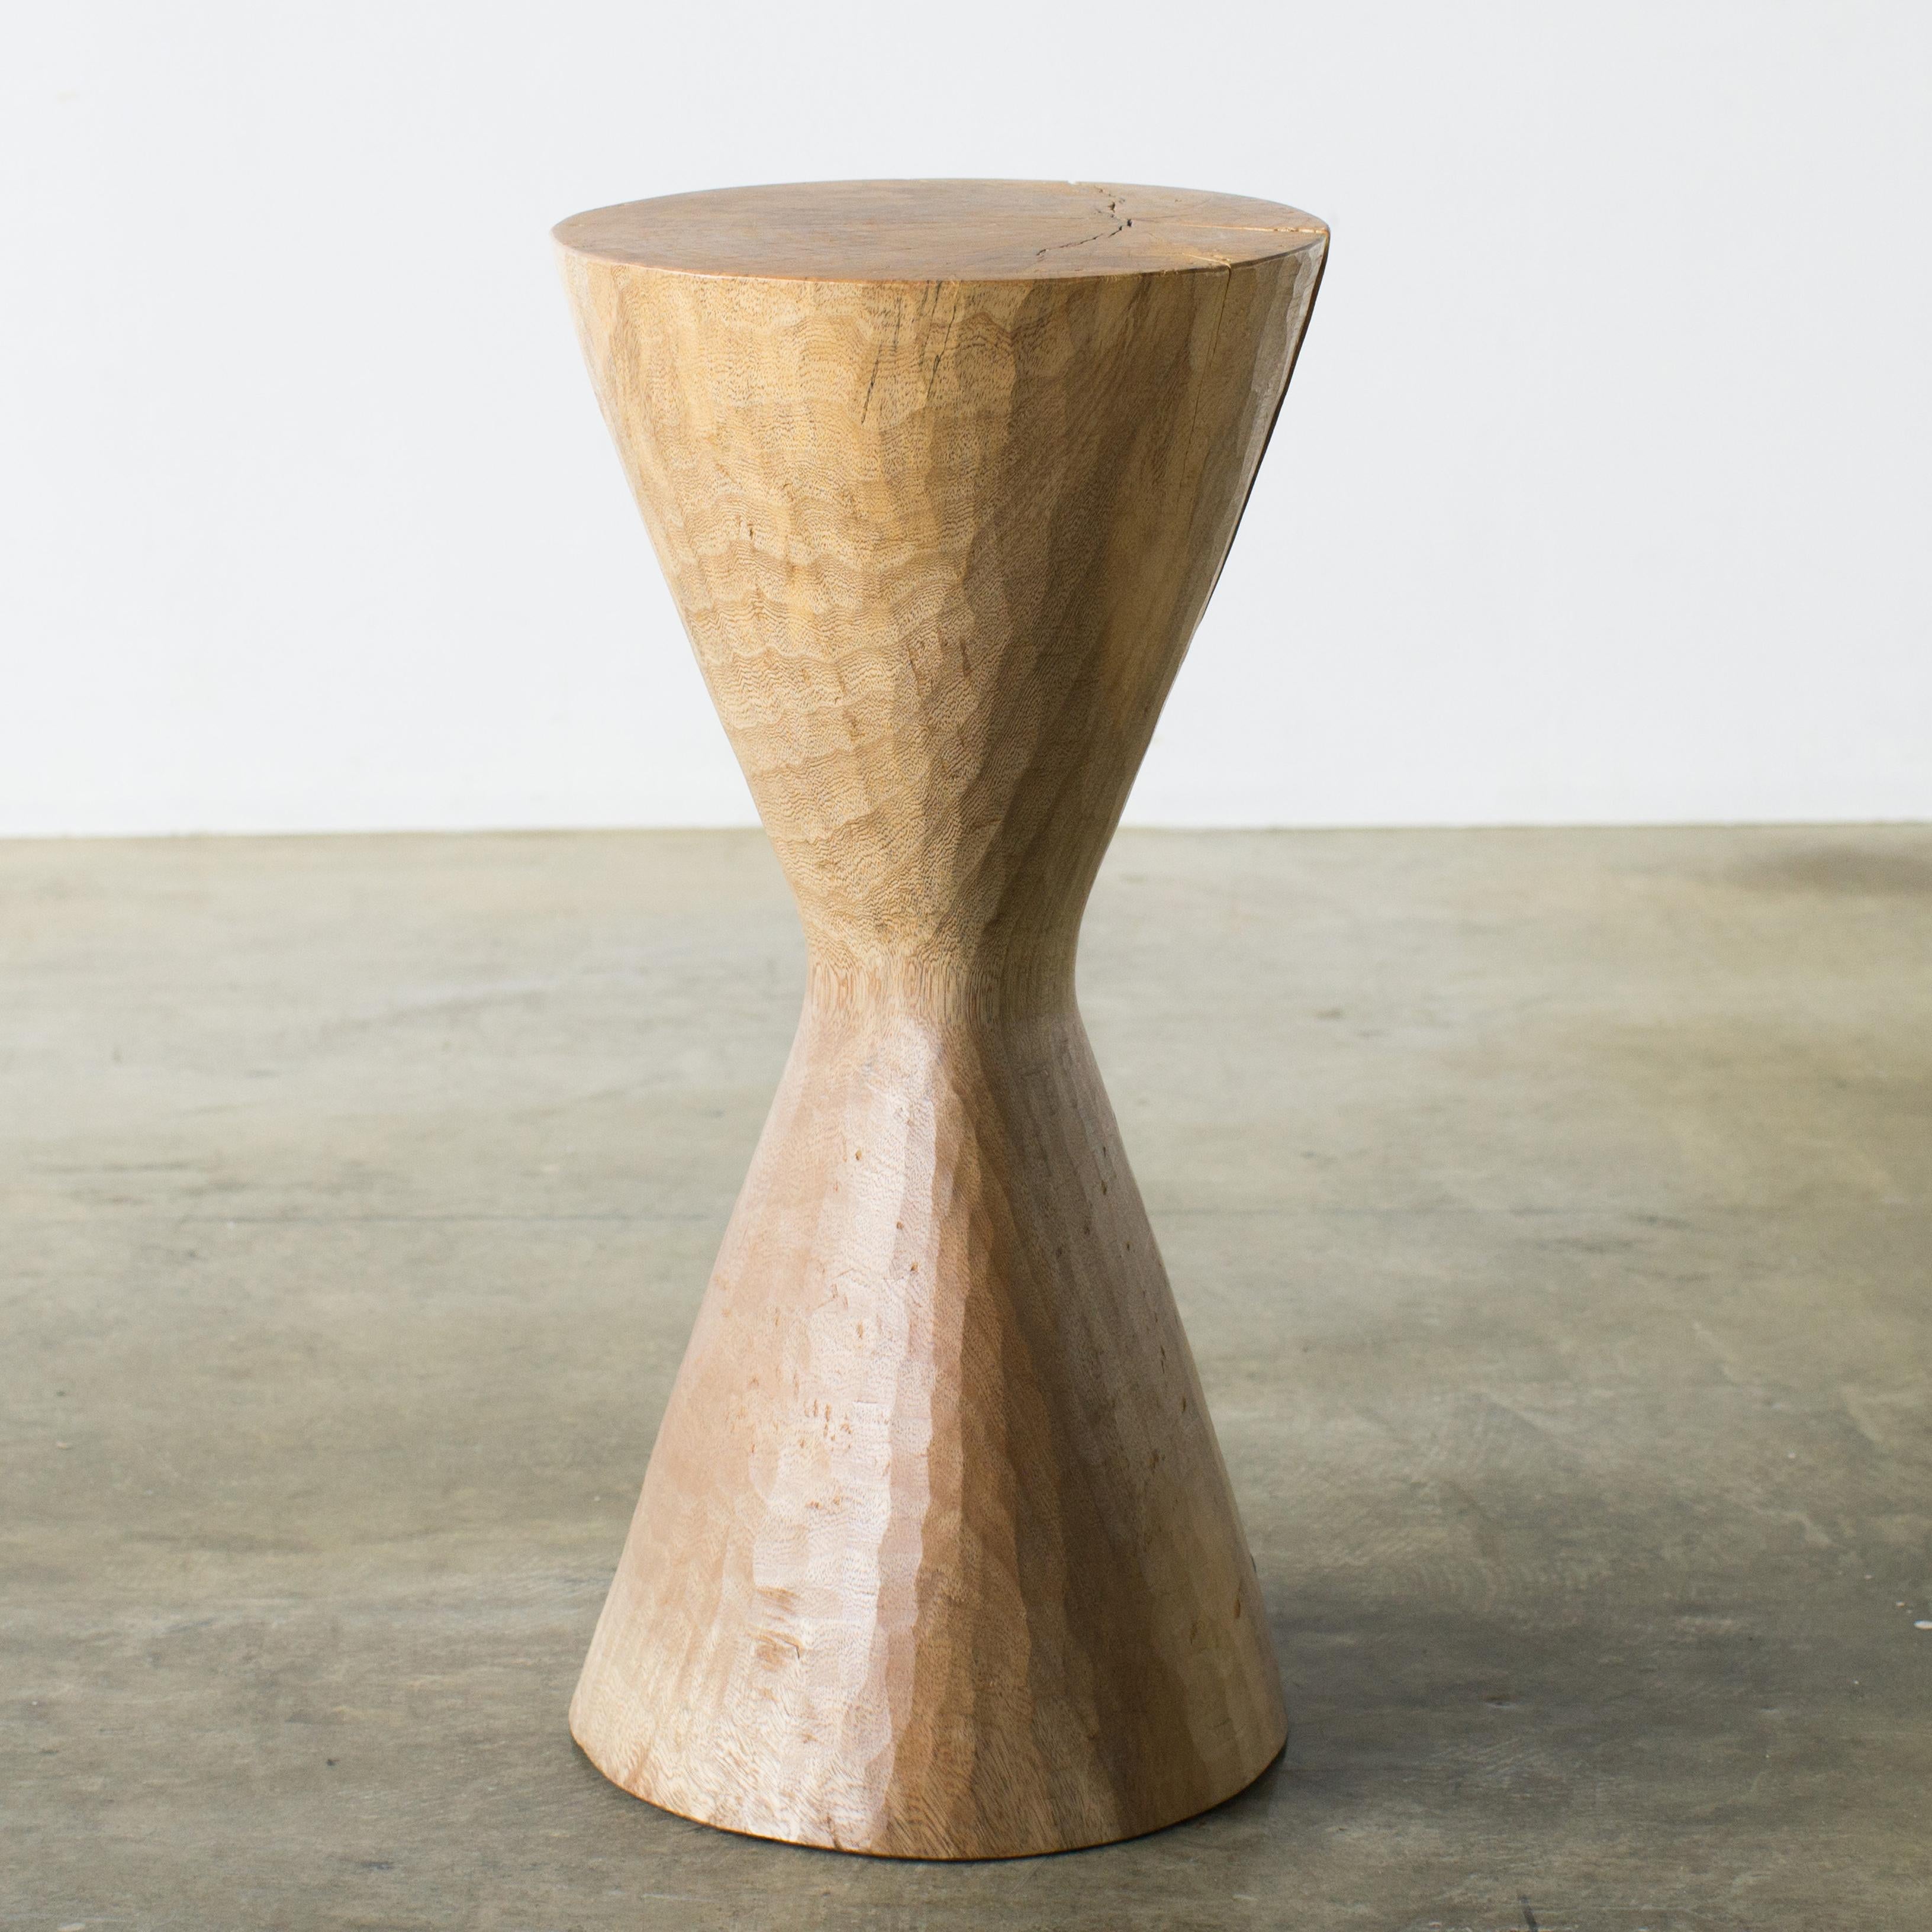 Name: A seaside girl
Sculptural stool by Hiroyuki Nishimura and zone carved furniture
Material: Chinquapin
This work is carved from log with some kinds of chainsaws.
Most of wood used for Nishimura's works are unable to use anything, these woods